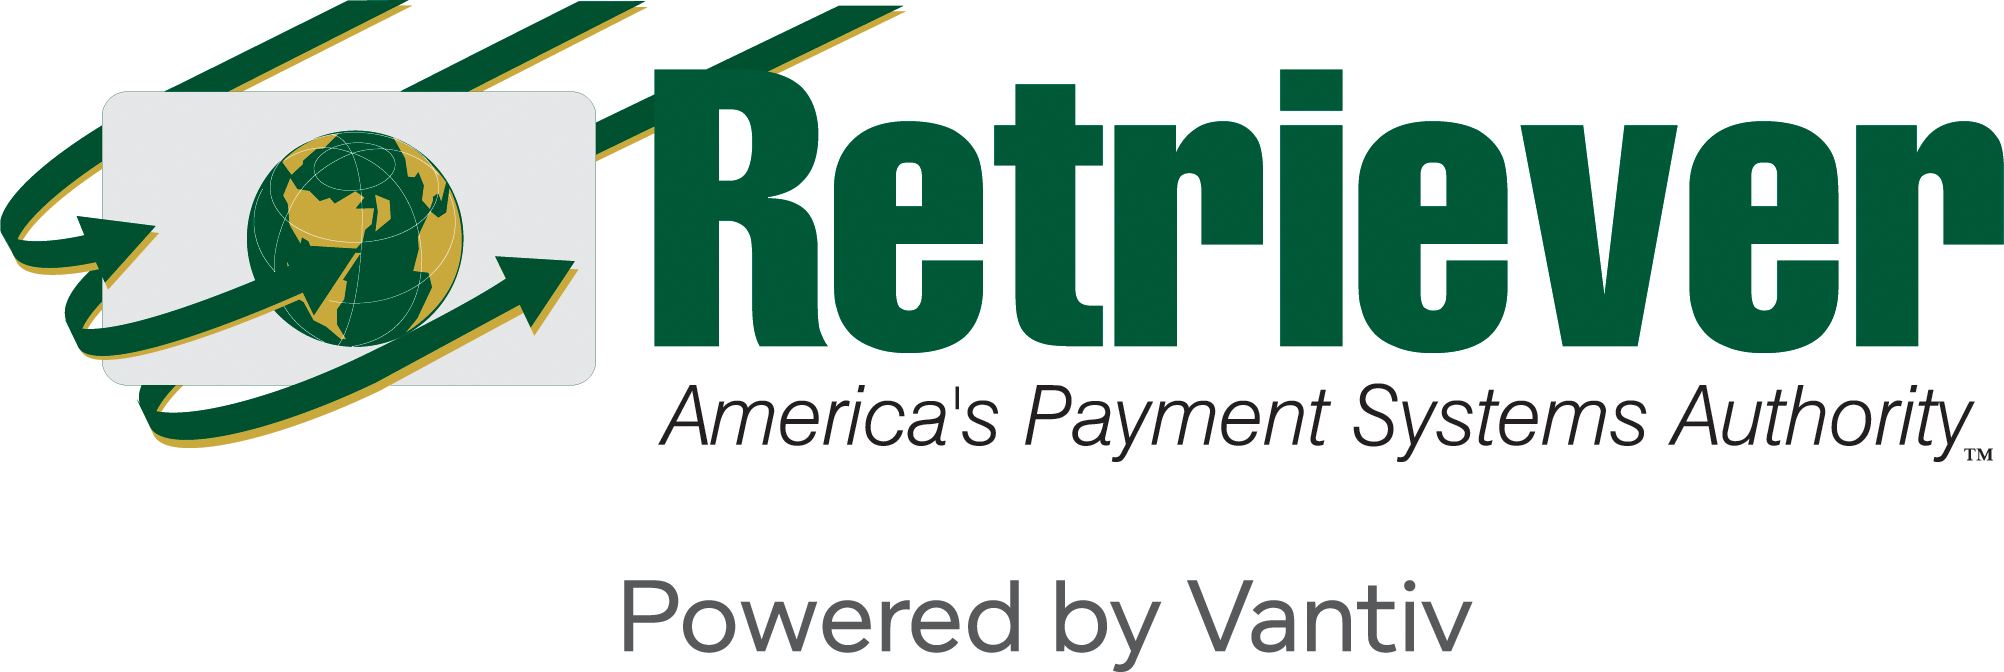 logo for Retriever, America's Payment Systems Authority